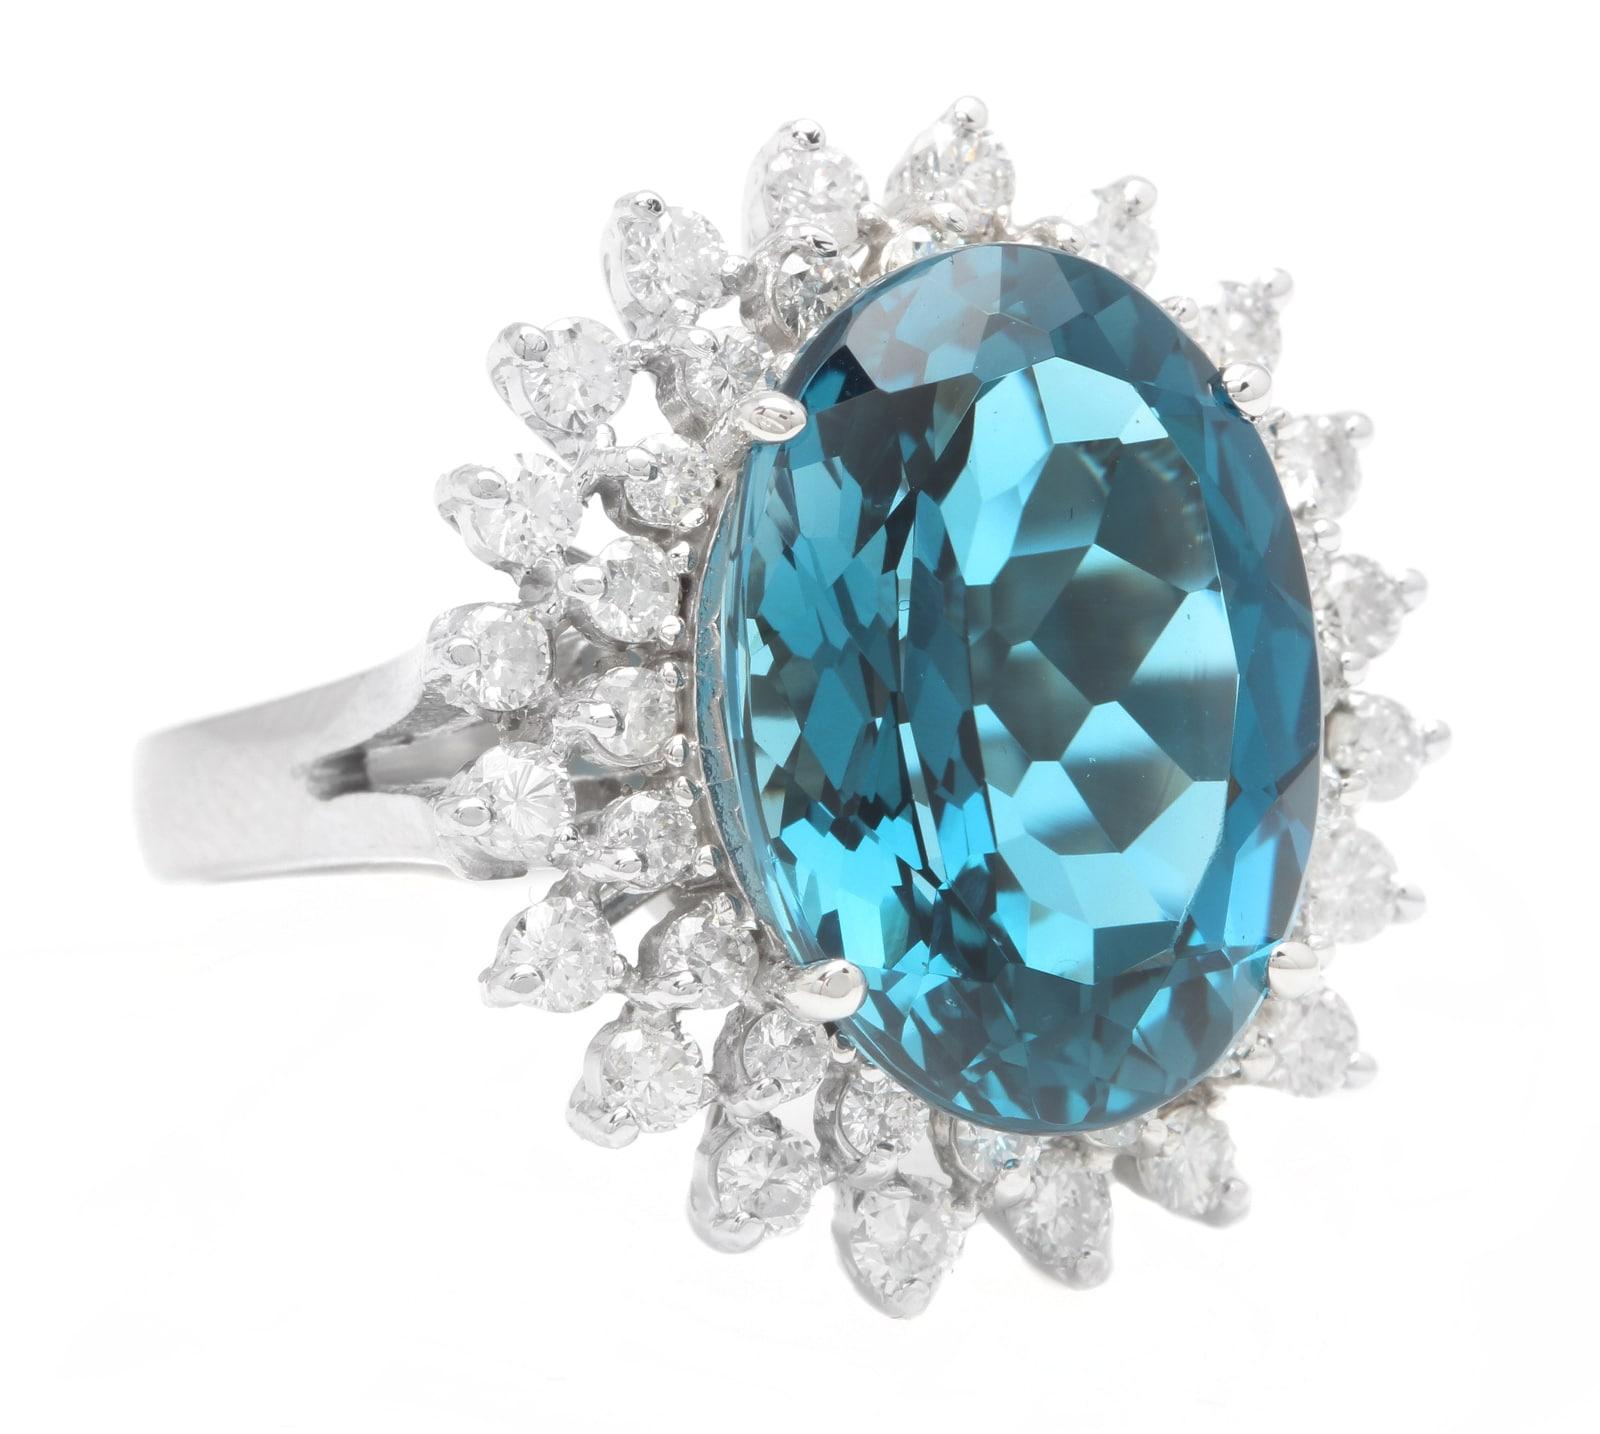 14.80 Carats Impressive Natural London Blue Topaz and Diamond 14K Solid White Gold Ring

Suggested Replacement Value: $7,000.00

Total Natural Oval London Blue Topaz Weight is: Approx. 13.00 Carats 
                                                  